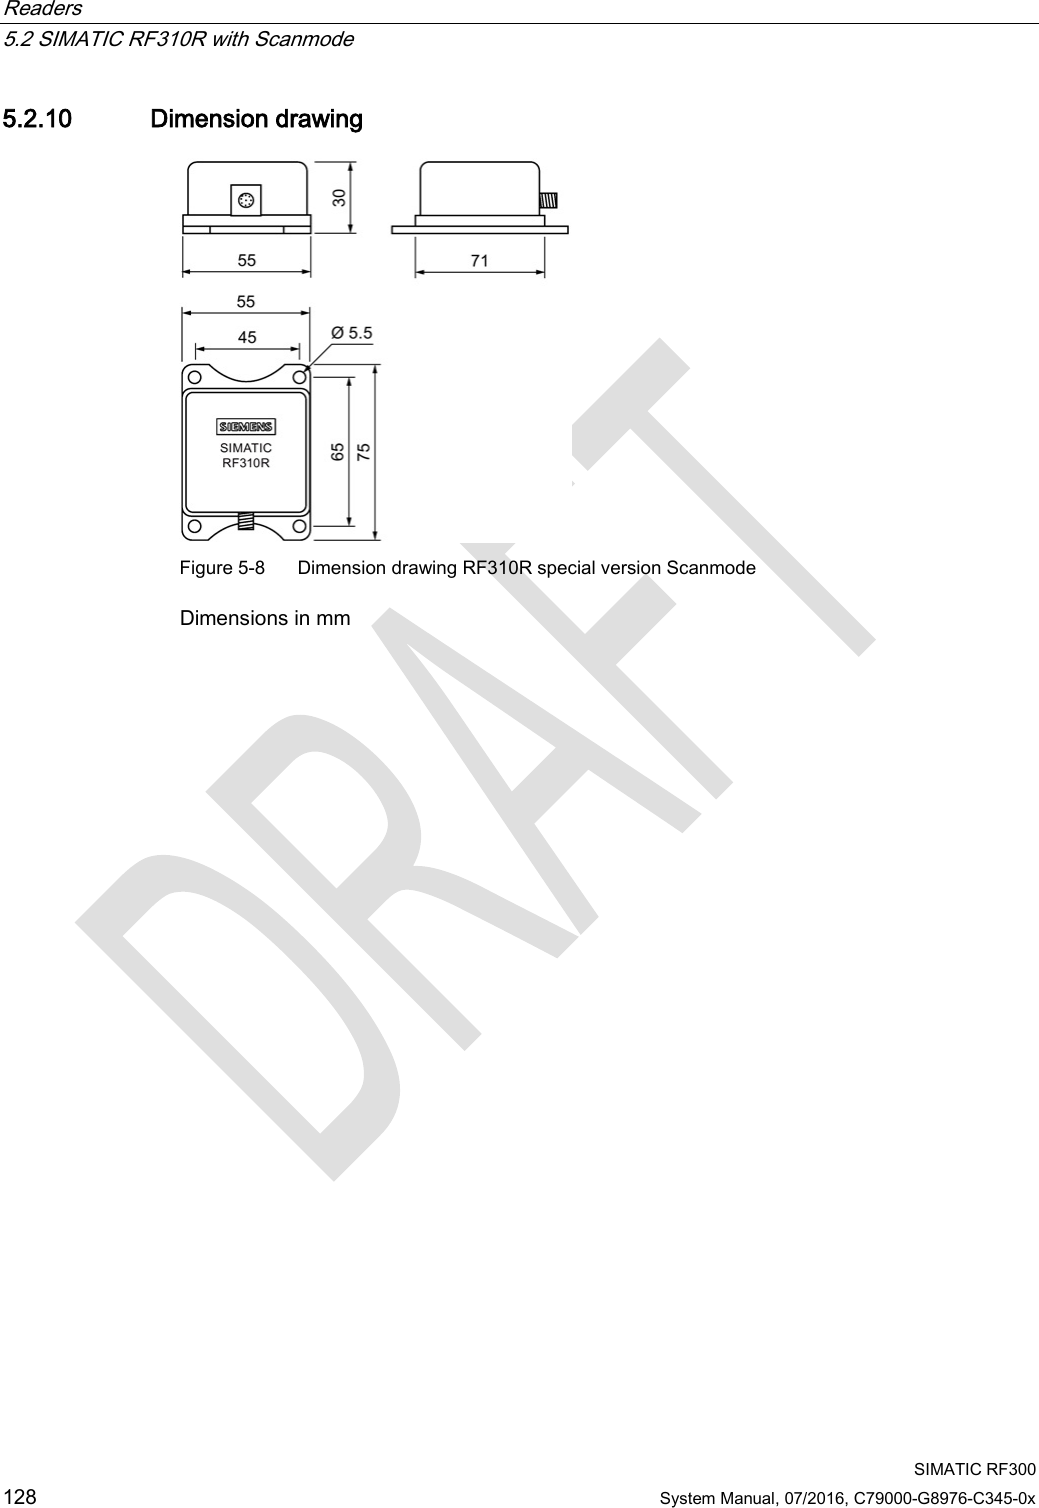 Readers   5.2 SIMATIC RF310R with Scanmode  SIMATIC RF300 128 System Manual, 07/2016, C79000-G8976-C345-0x 5.2.10 Dimension drawing  Figure 5-8  Dimension drawing RF310R special version Scanmode Dimensions in mm  